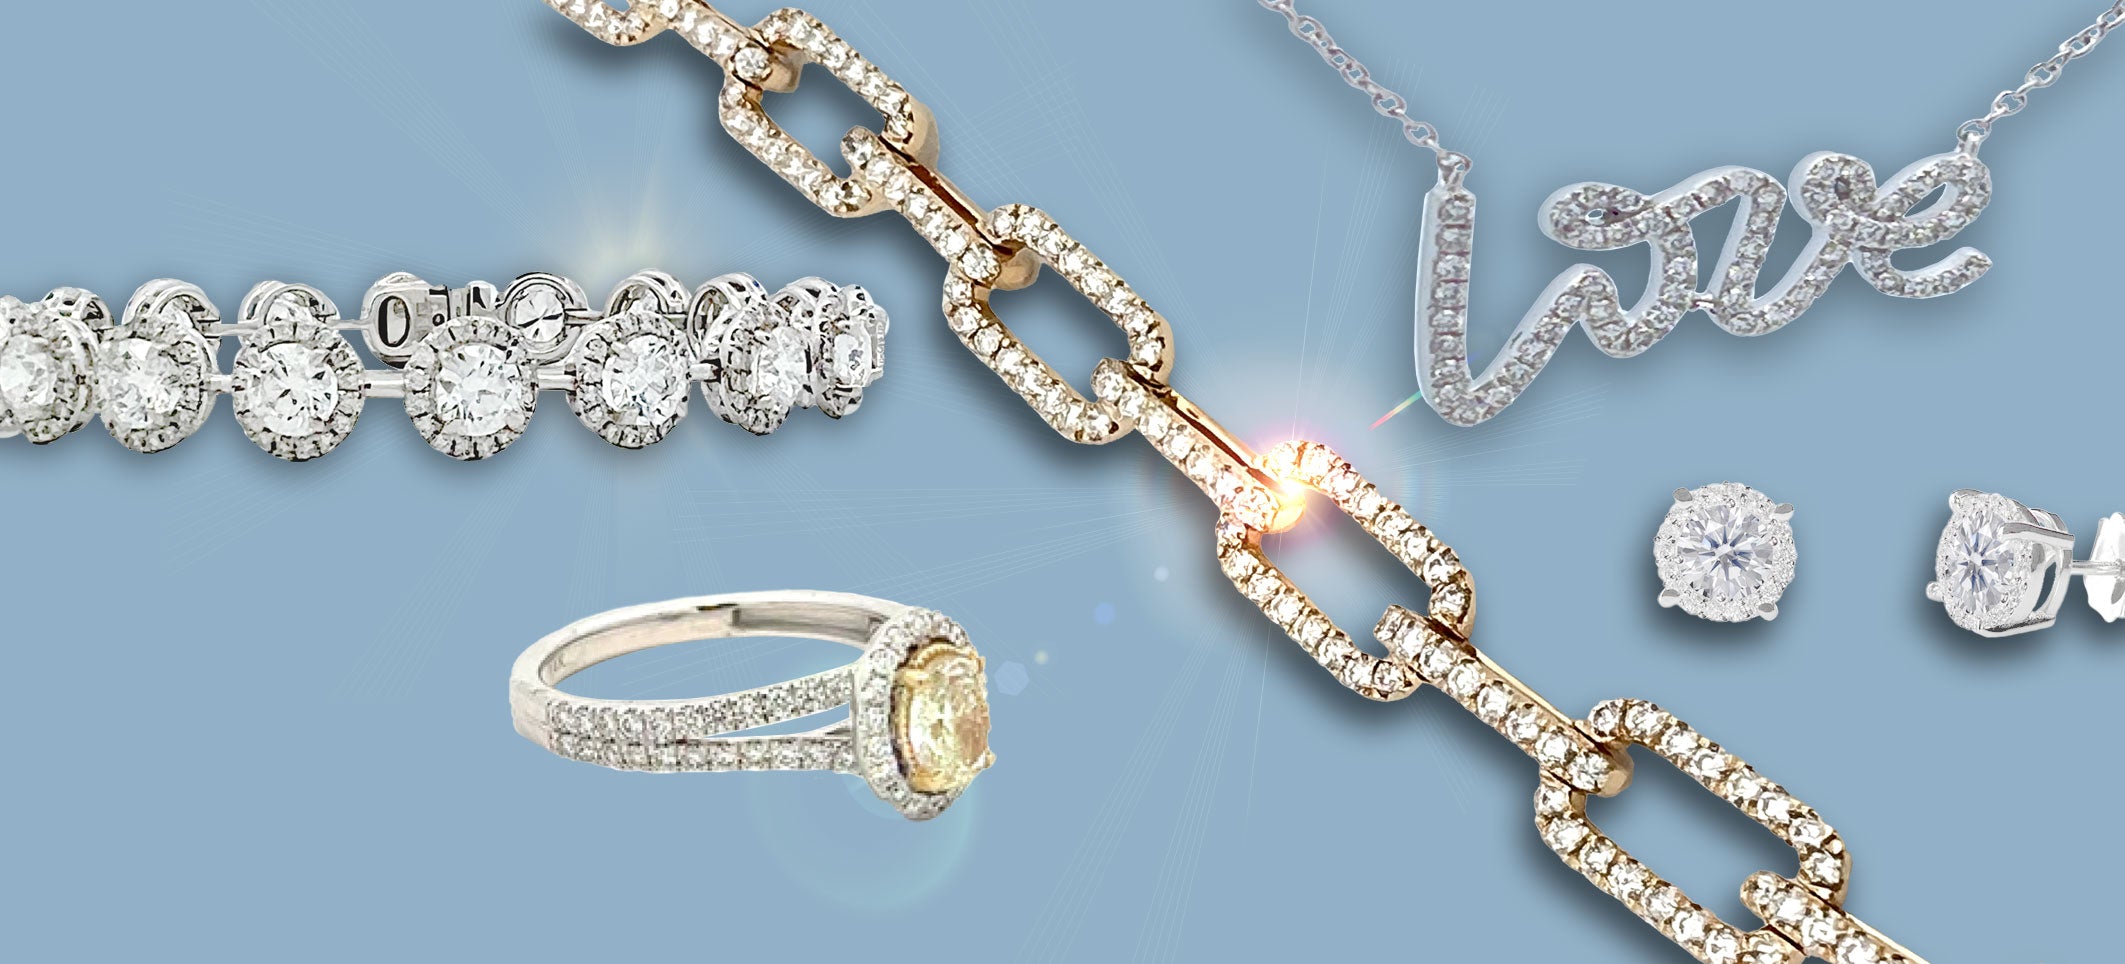 Shop Klein's Jewelry and explore our collection and learn about our commitment to quality and customer satisfaction.